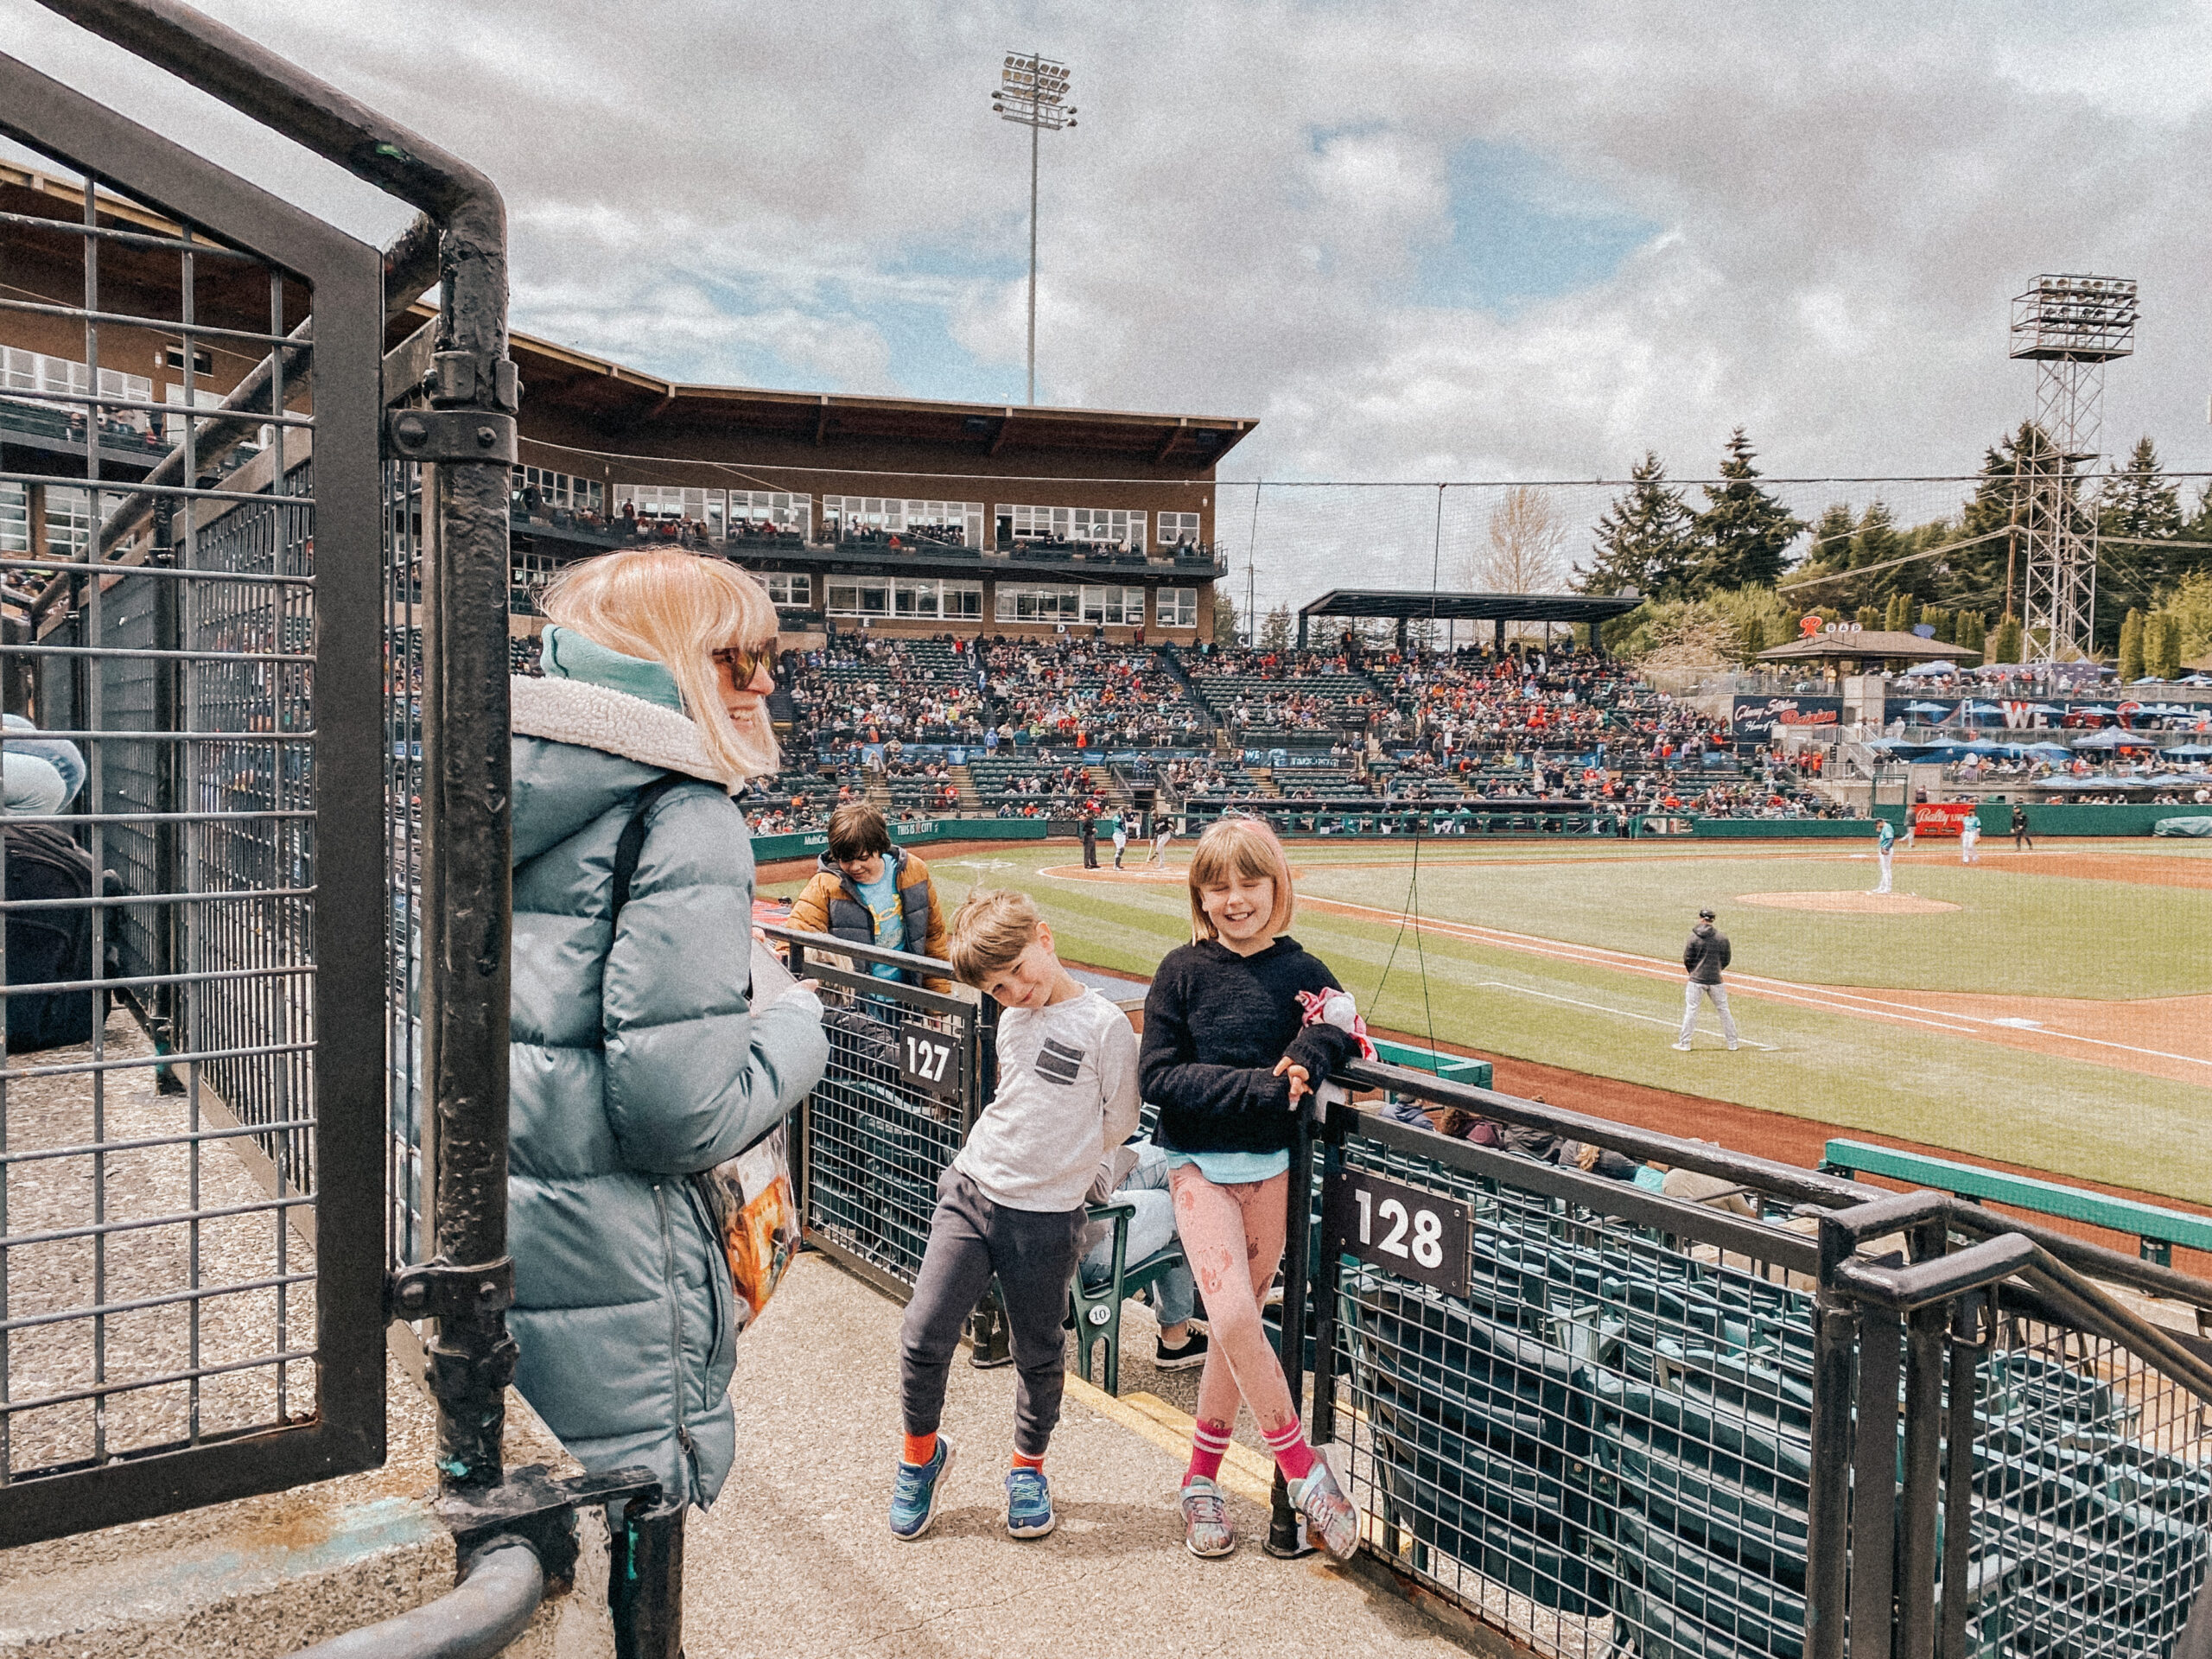 mom in blue coat standing at baseball game with kids